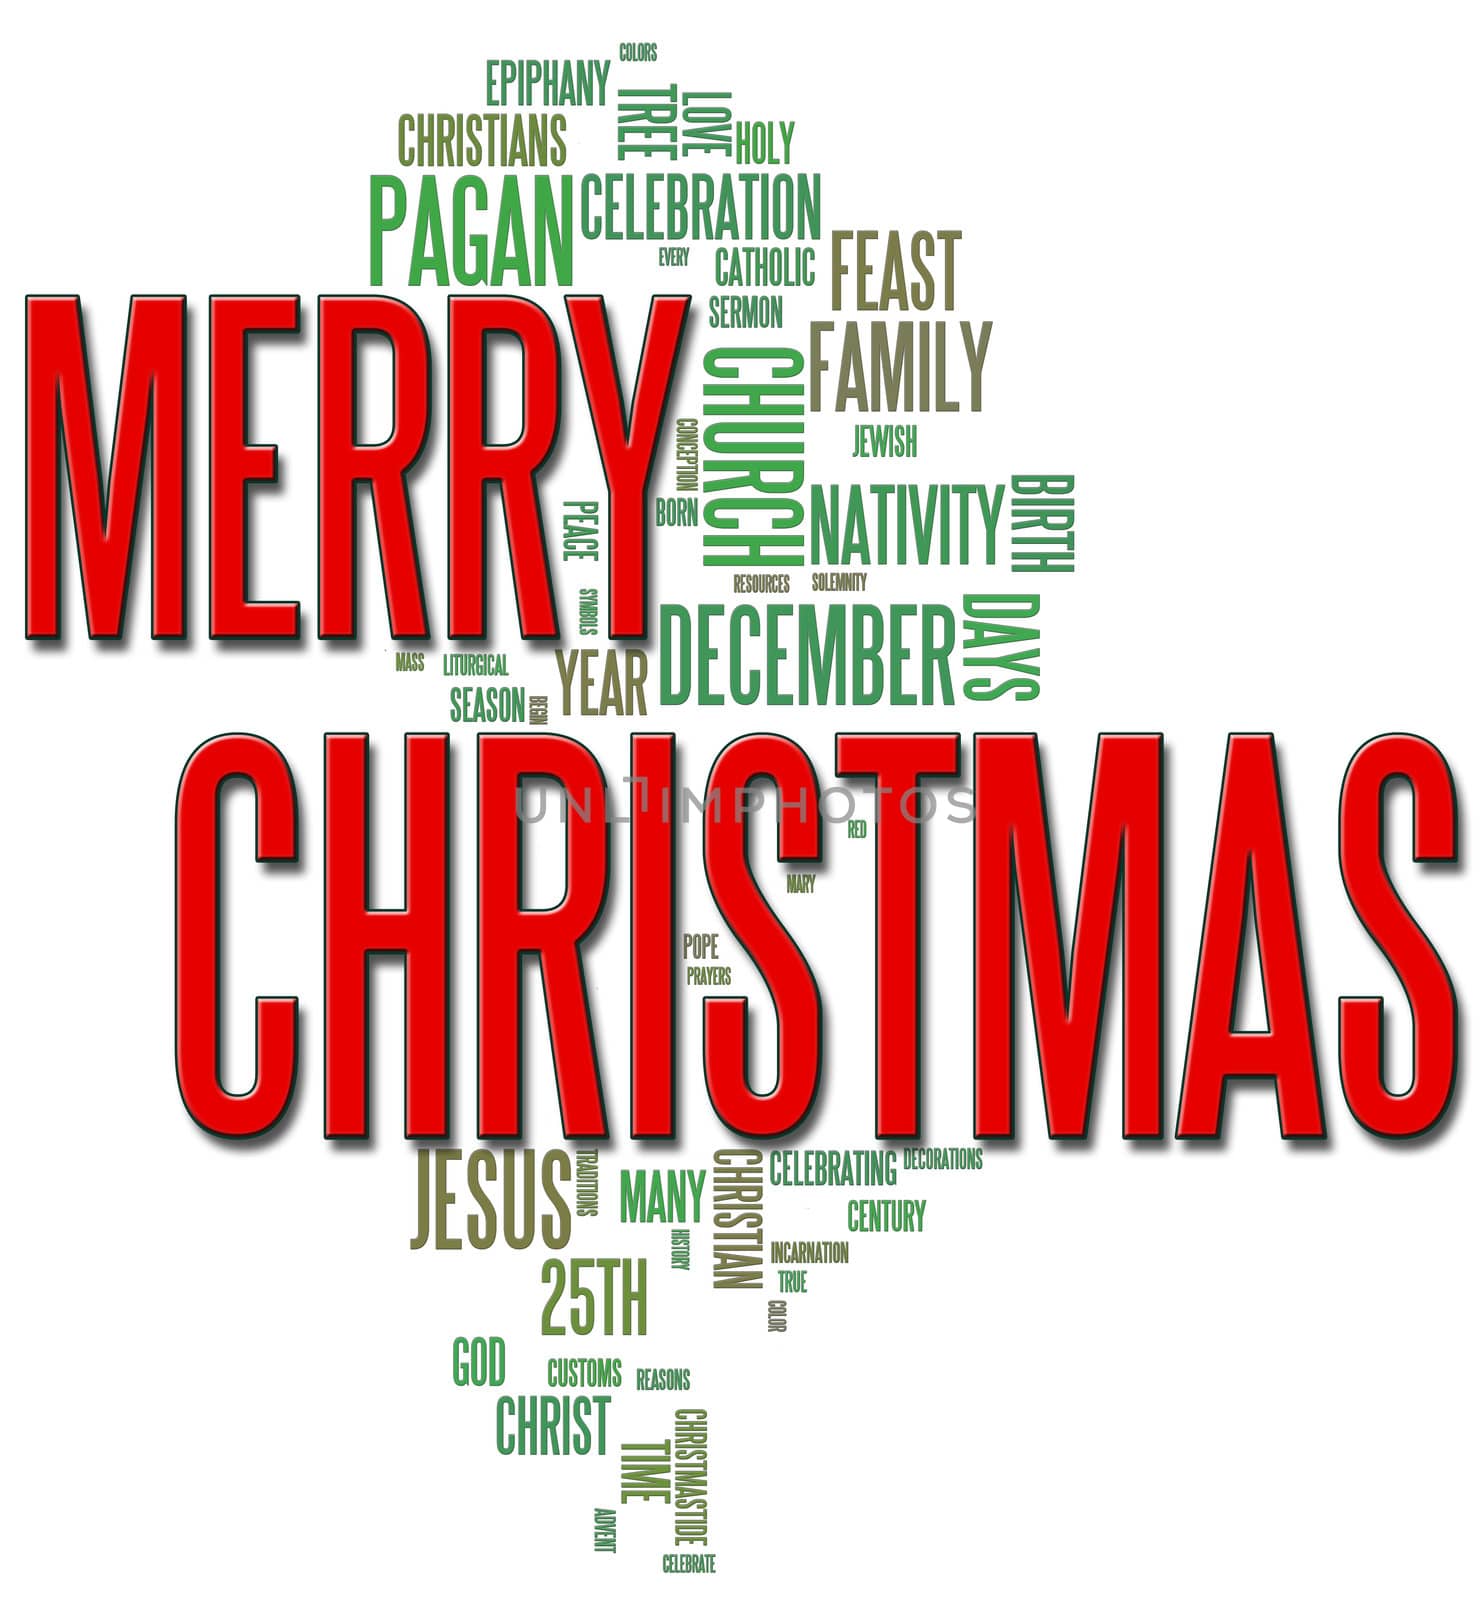 Merry Christmas themed word cloud in red and green